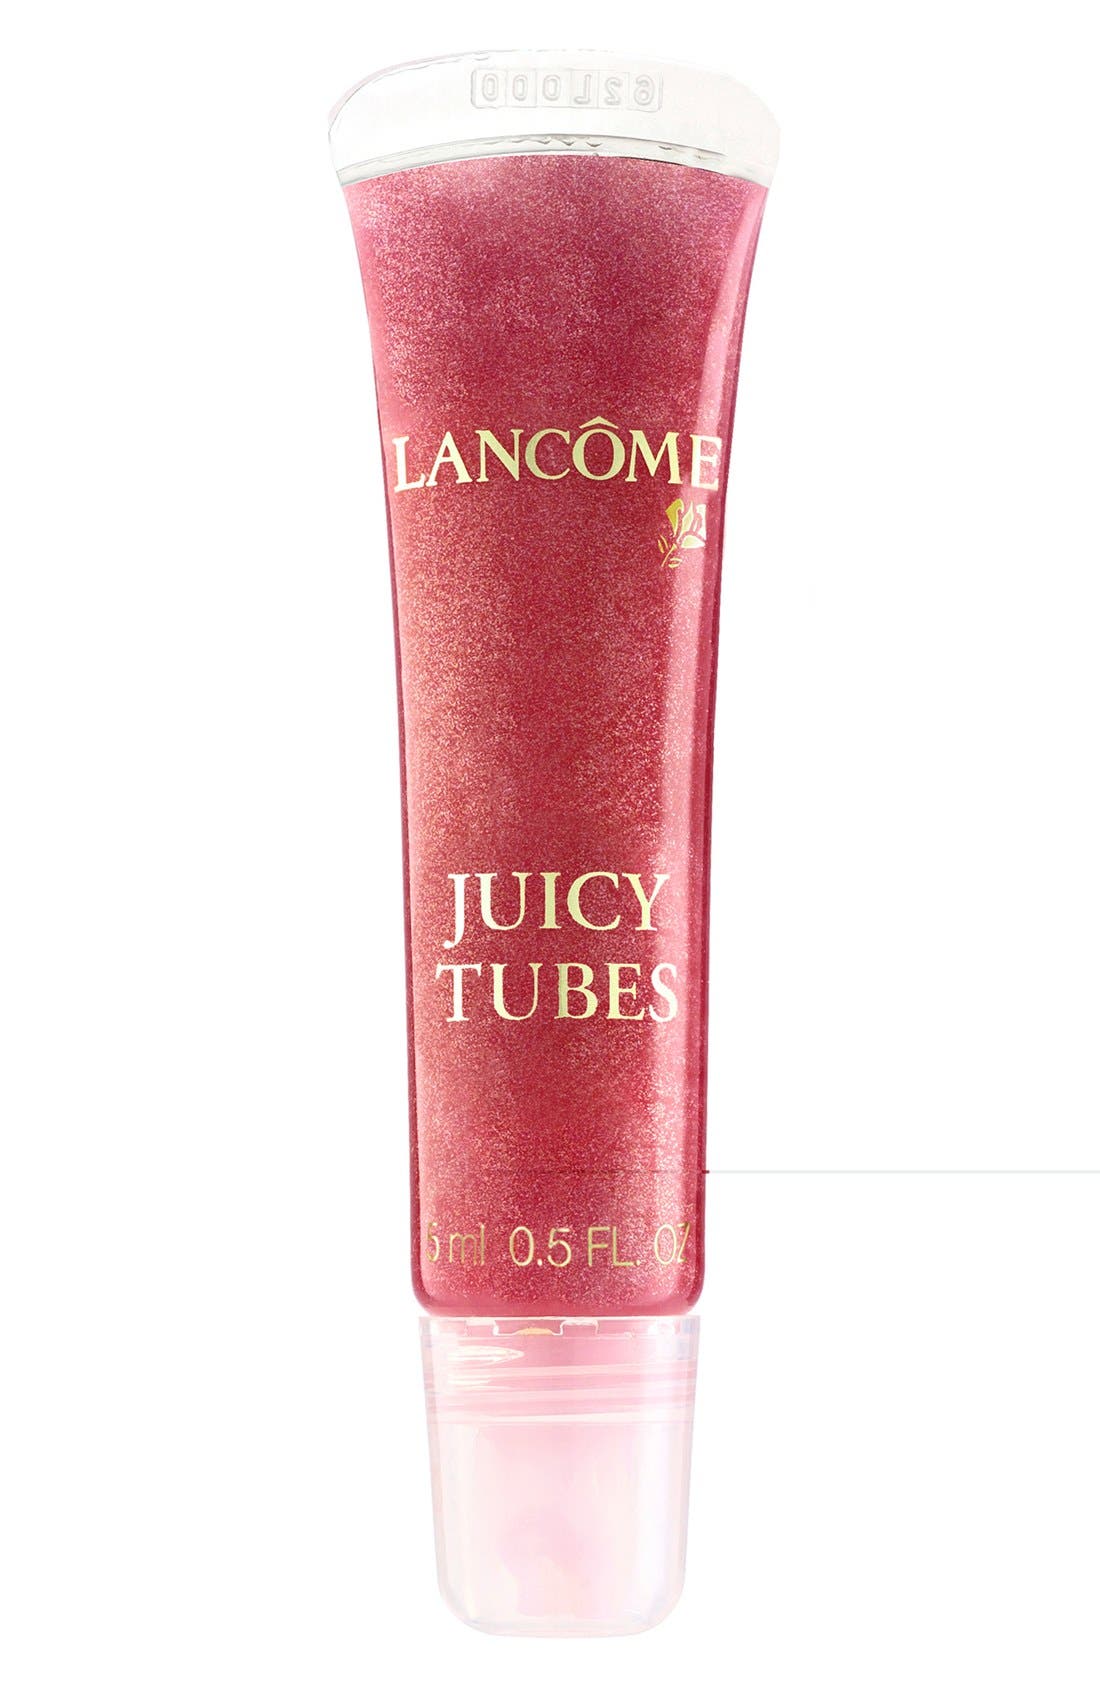 EAN 3147752770199 product image for Lancome Juicy Tubes Lip Gloss - Lychee | upcitemdb.com